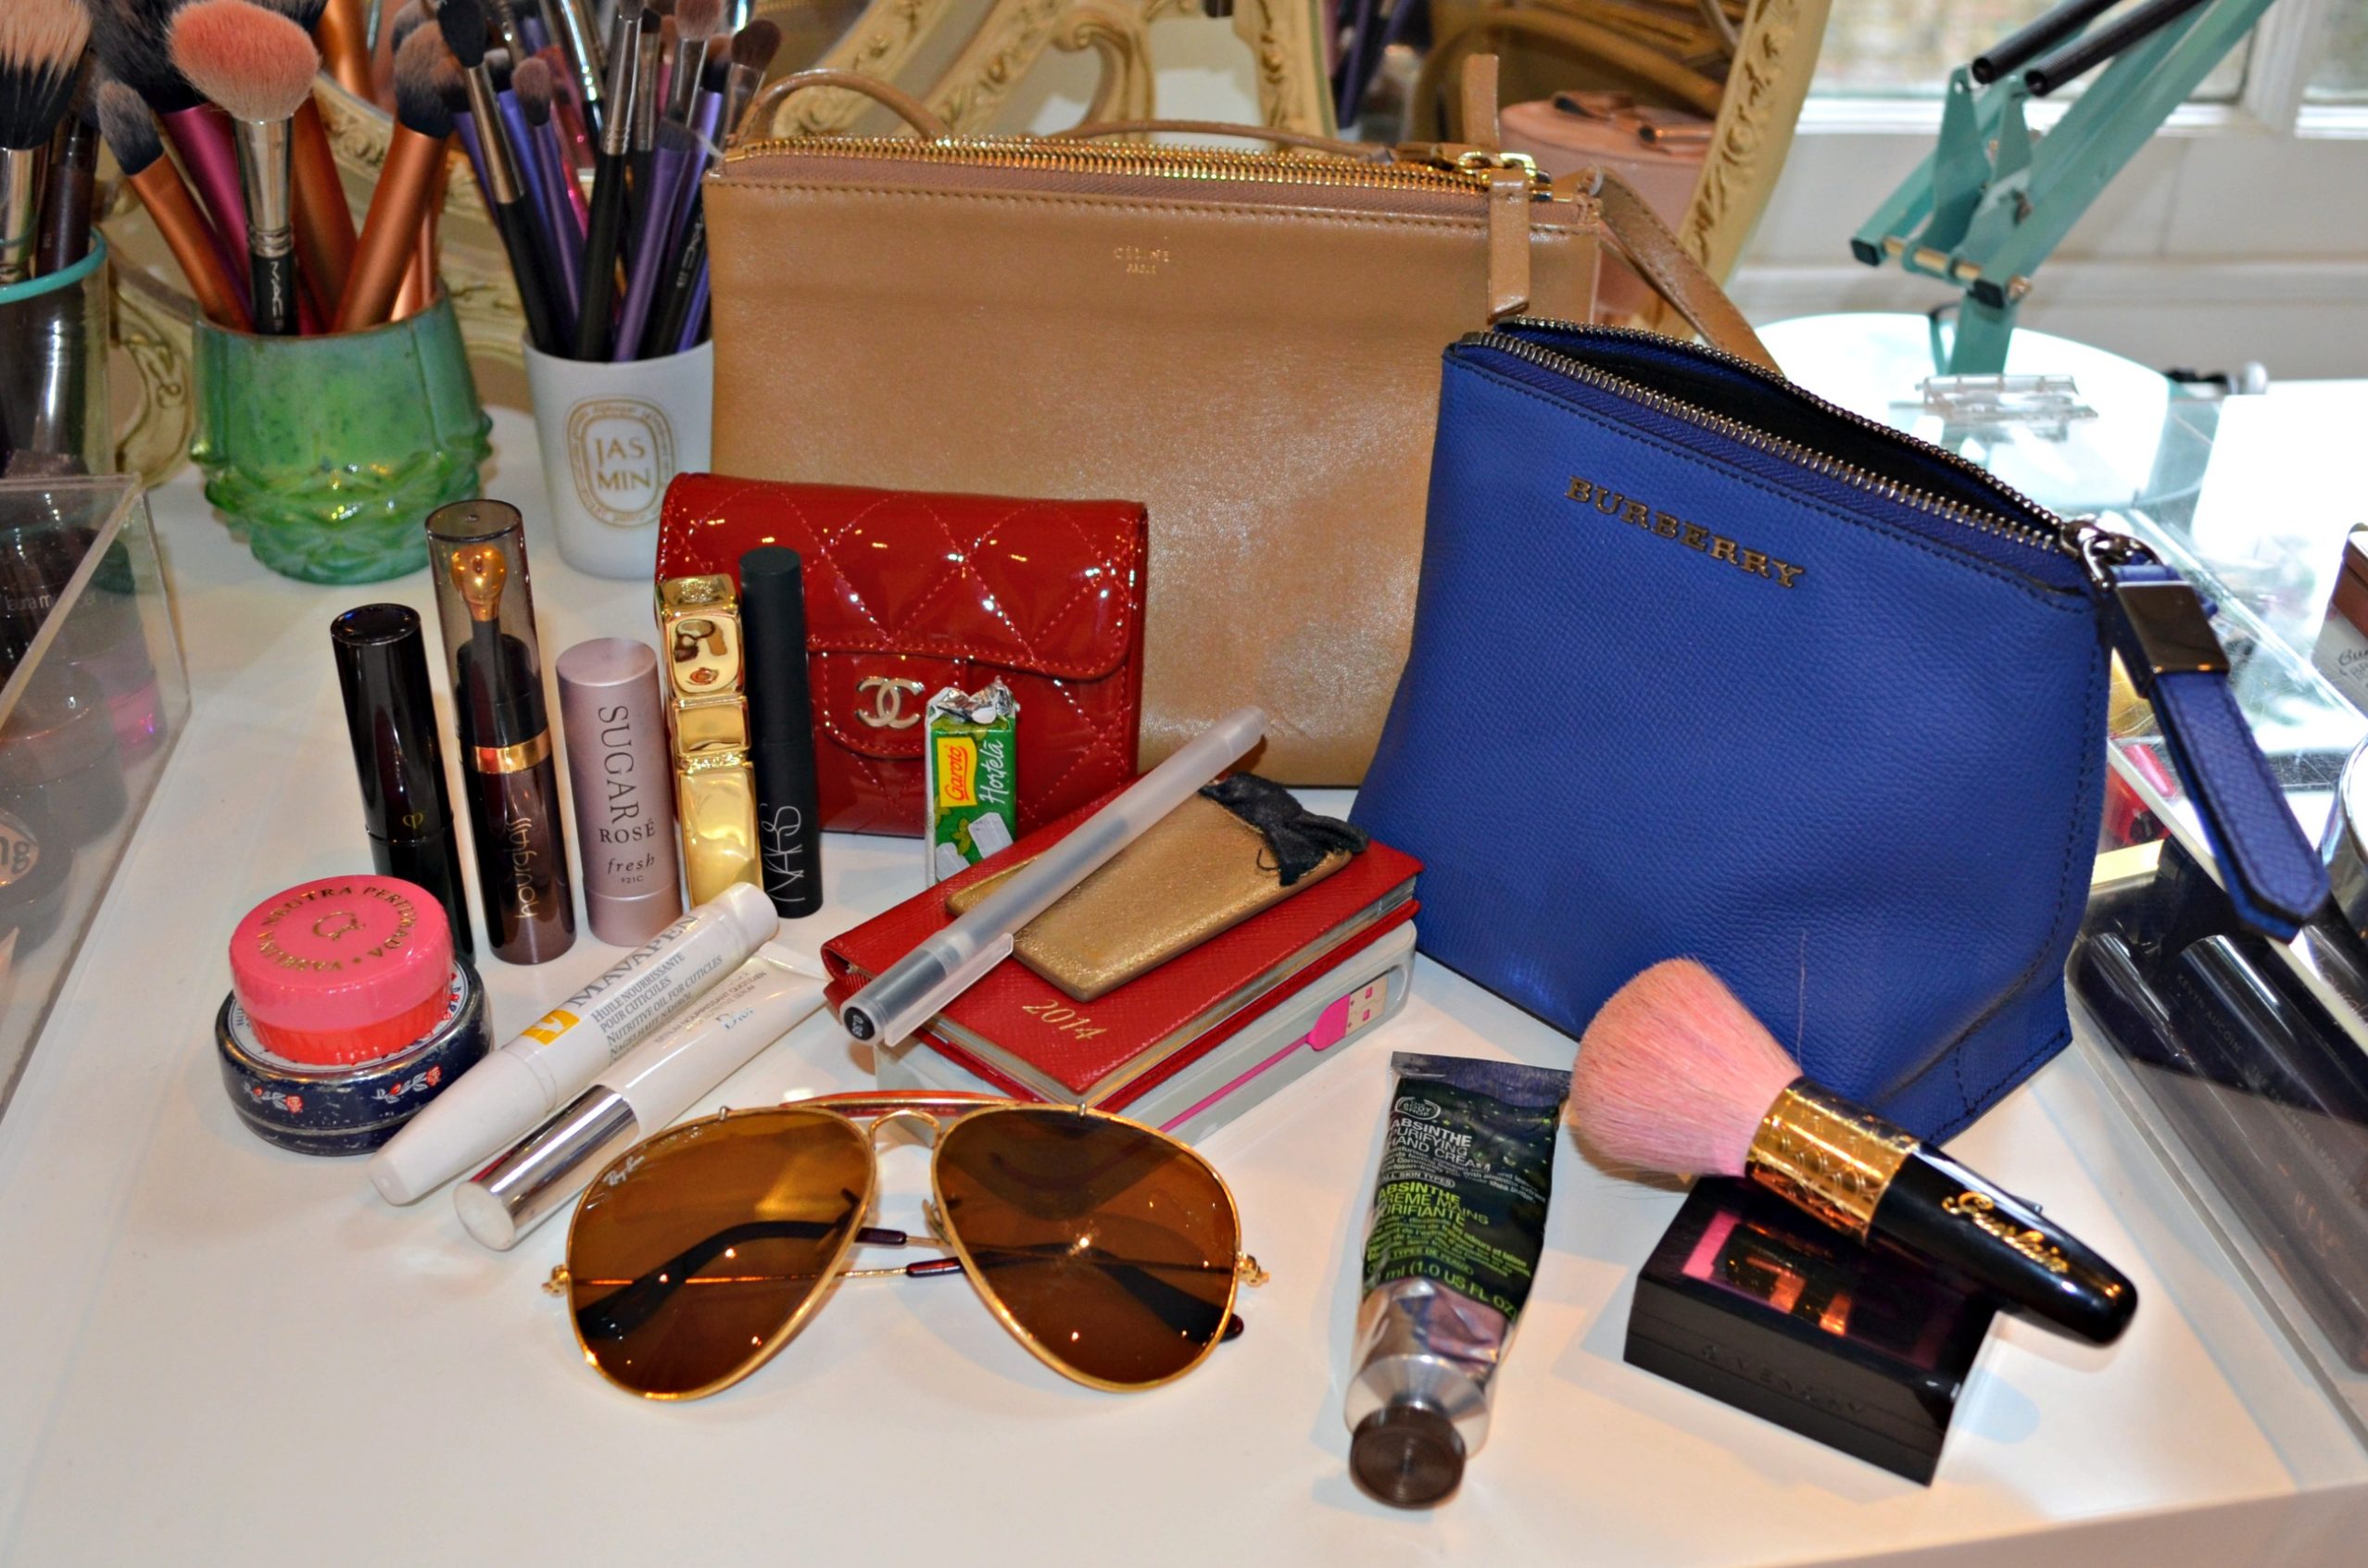 whats in your bag